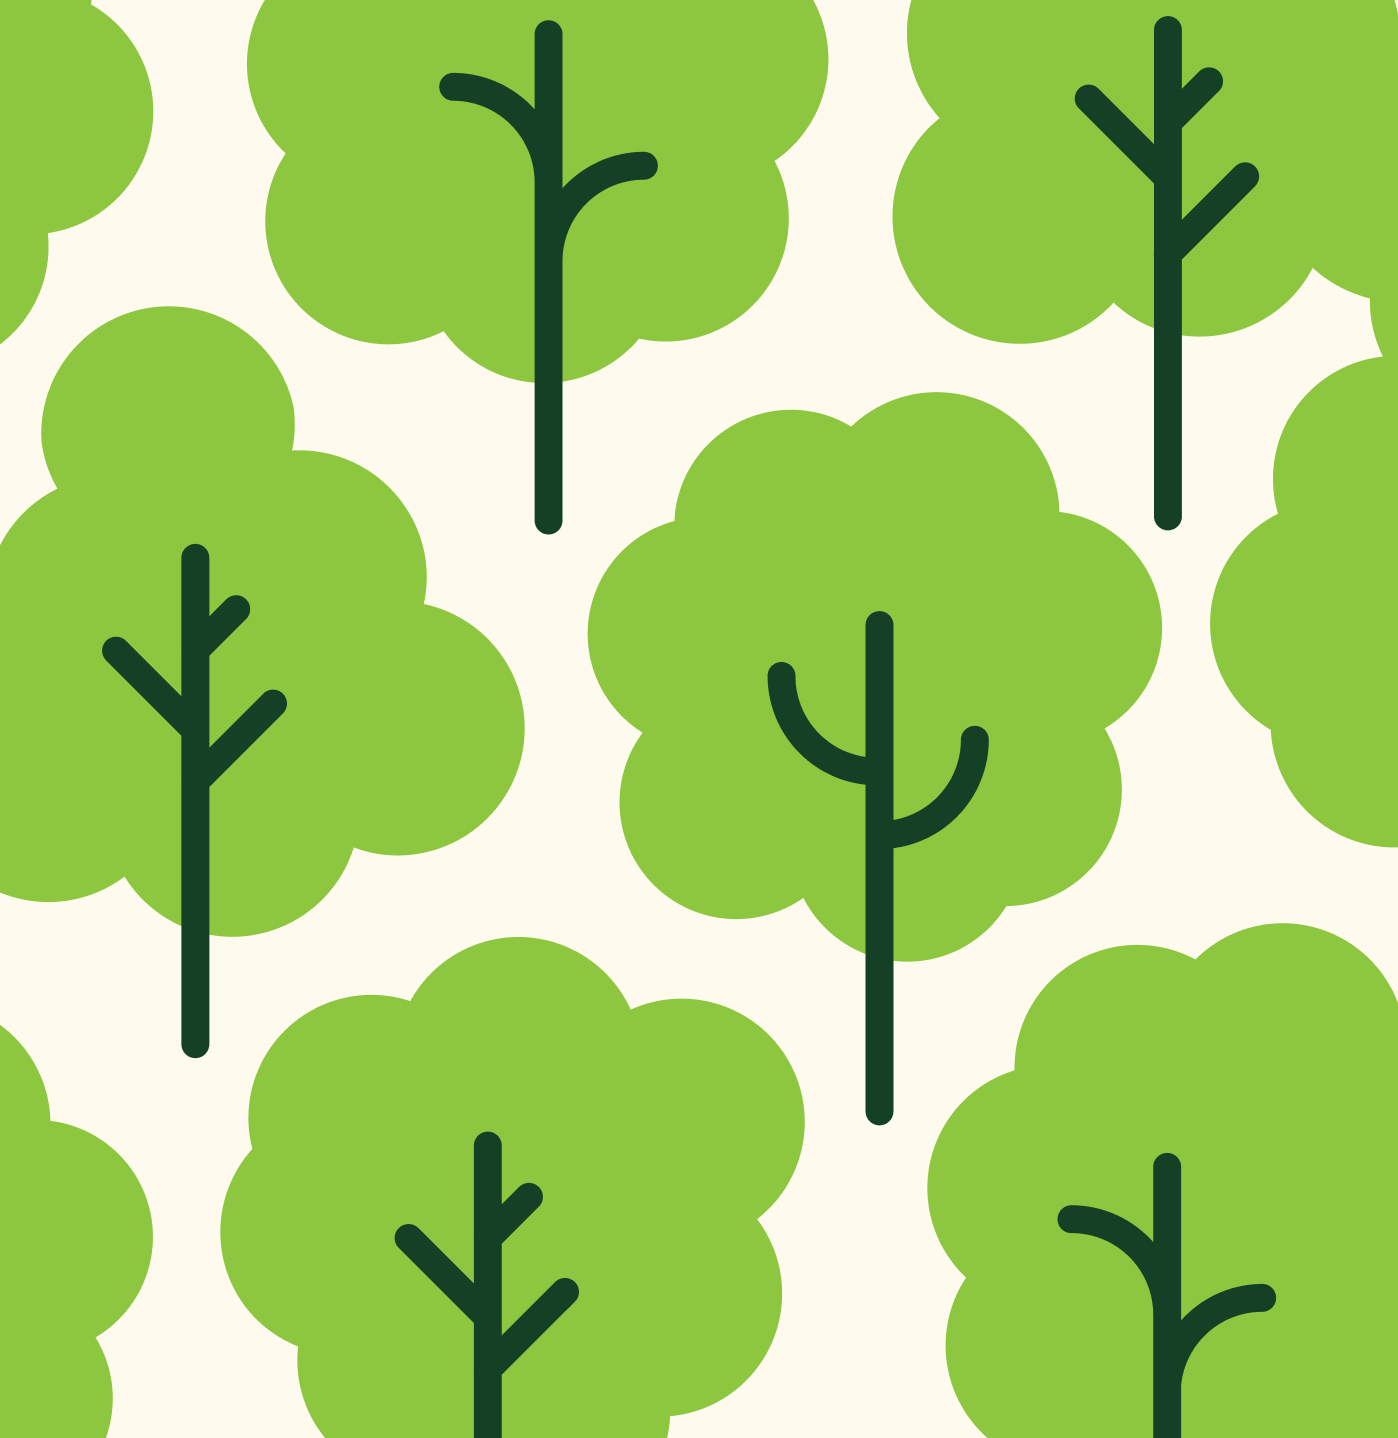 trees-for-all-banner